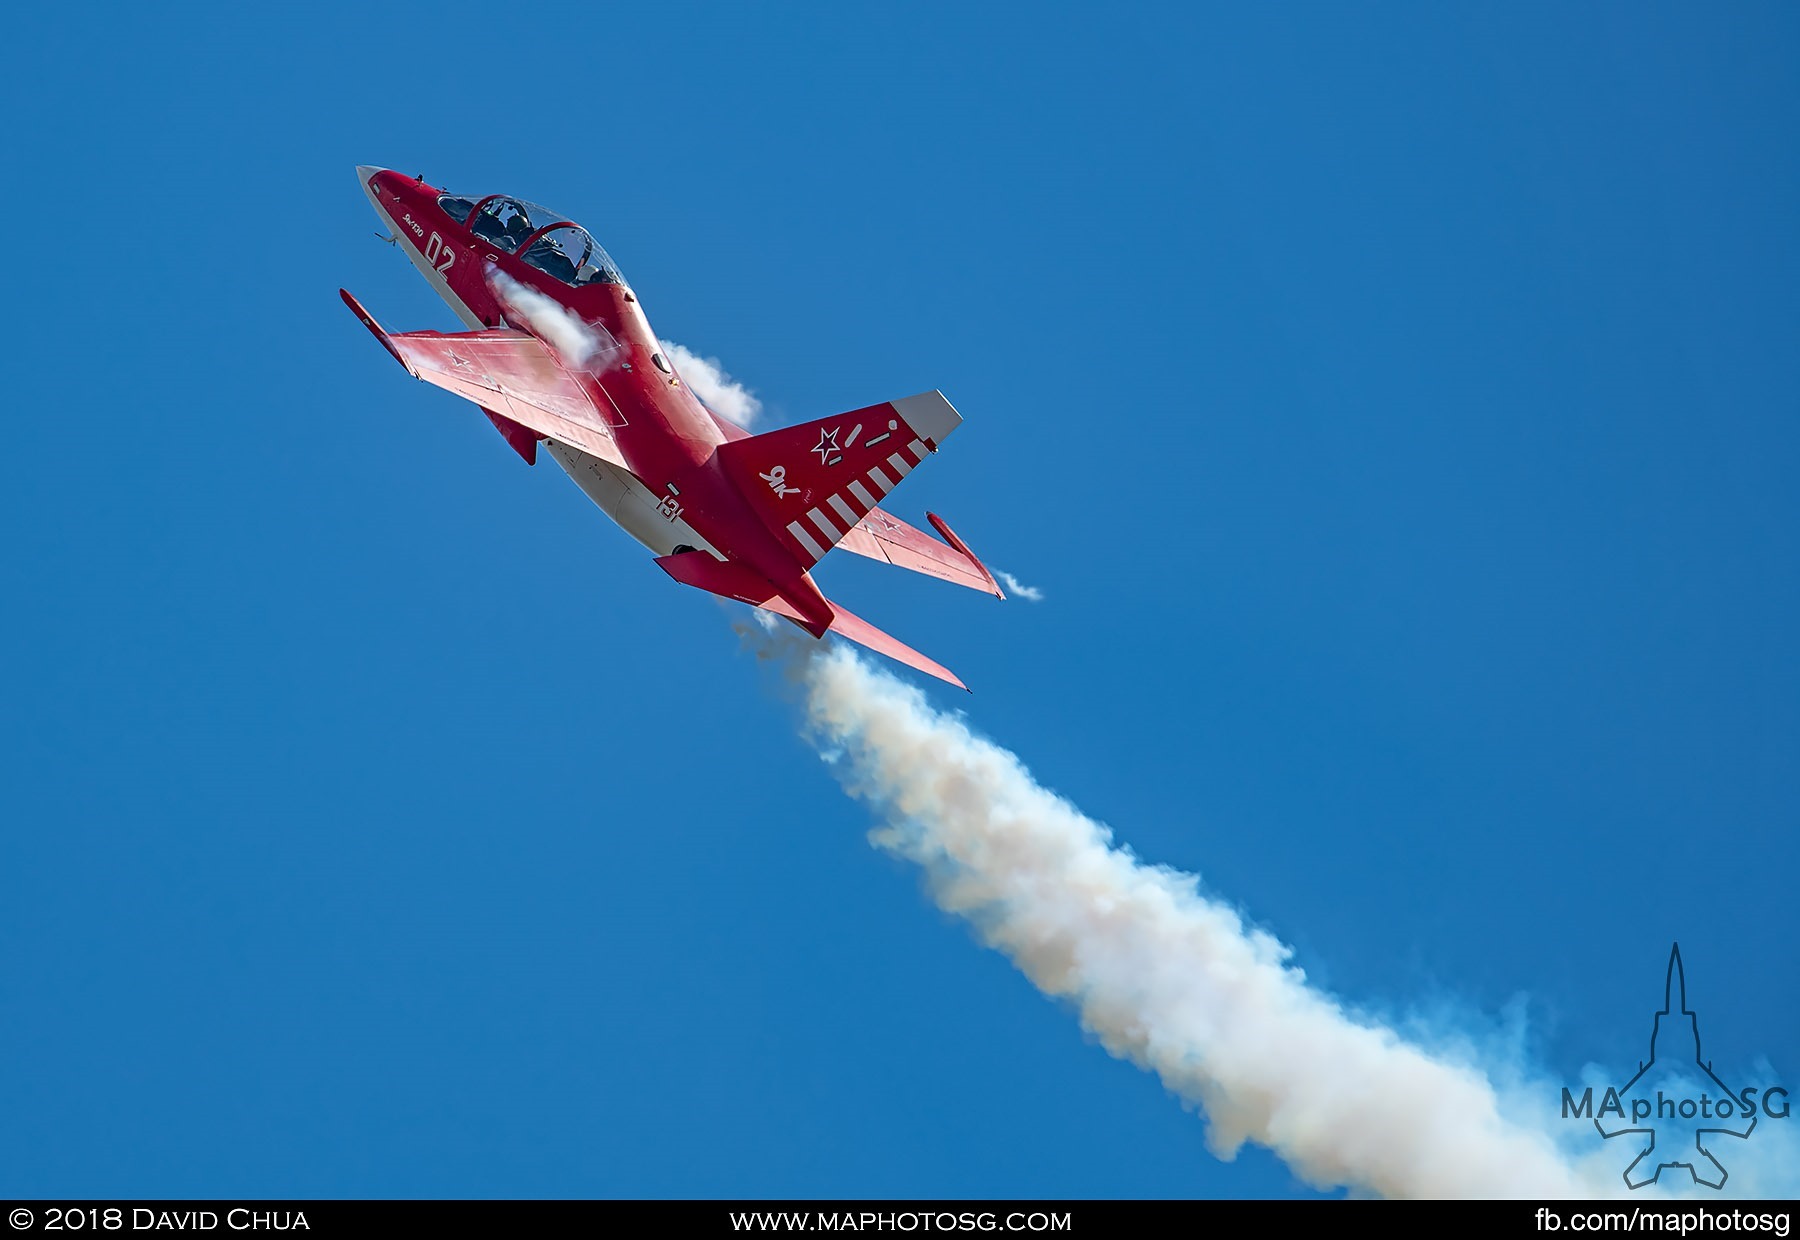 43. Yakovlev Yak-130 demonstration aircraft pulls up during its aerial display performance